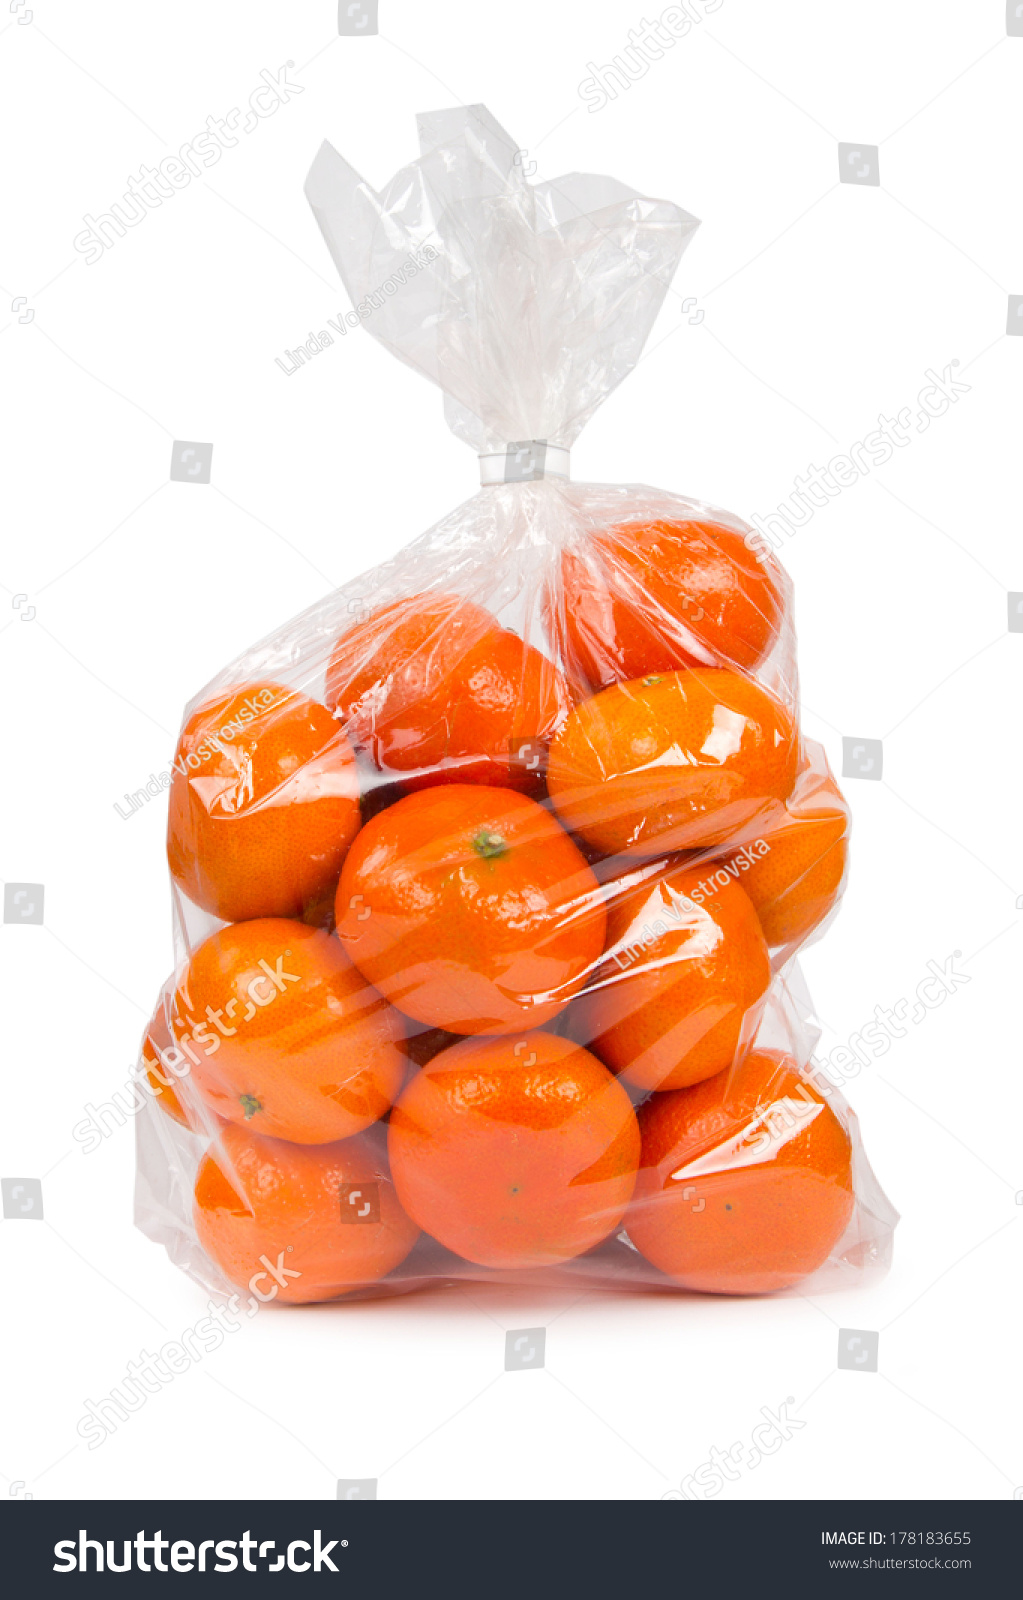 Photo Of Tangerines In A Plastic Bag Isolated On White - 178183655 ...